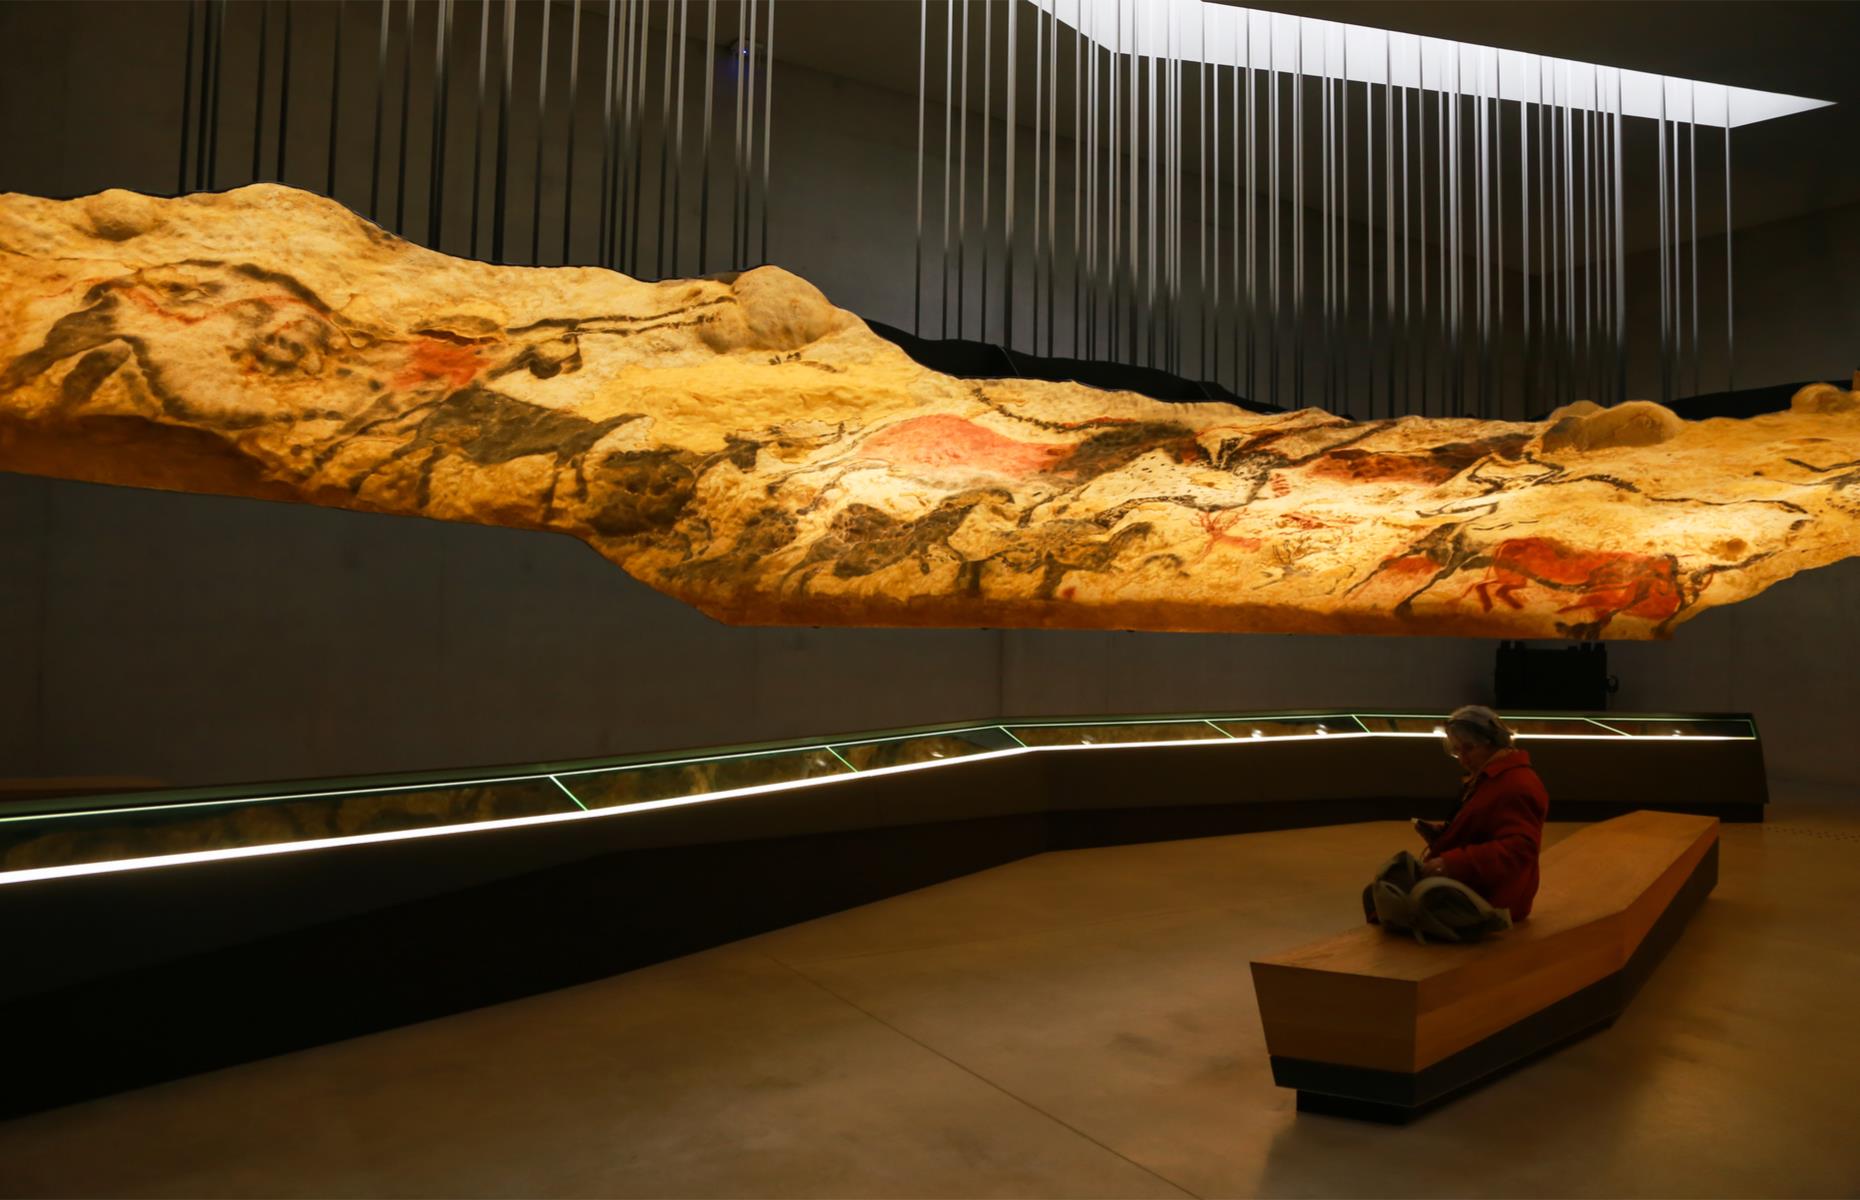 Thousands flocked to see them, changing the caves' atmosphere and causing algae and crystals to irreparably damage the artwork. While you might not get to see the real thing, a spectacular and complete replica of France's most celebrated cave art opened in 2016. The striking centre is set at the foot of the hill where the original cave art was found and is known as Lascaux 4.